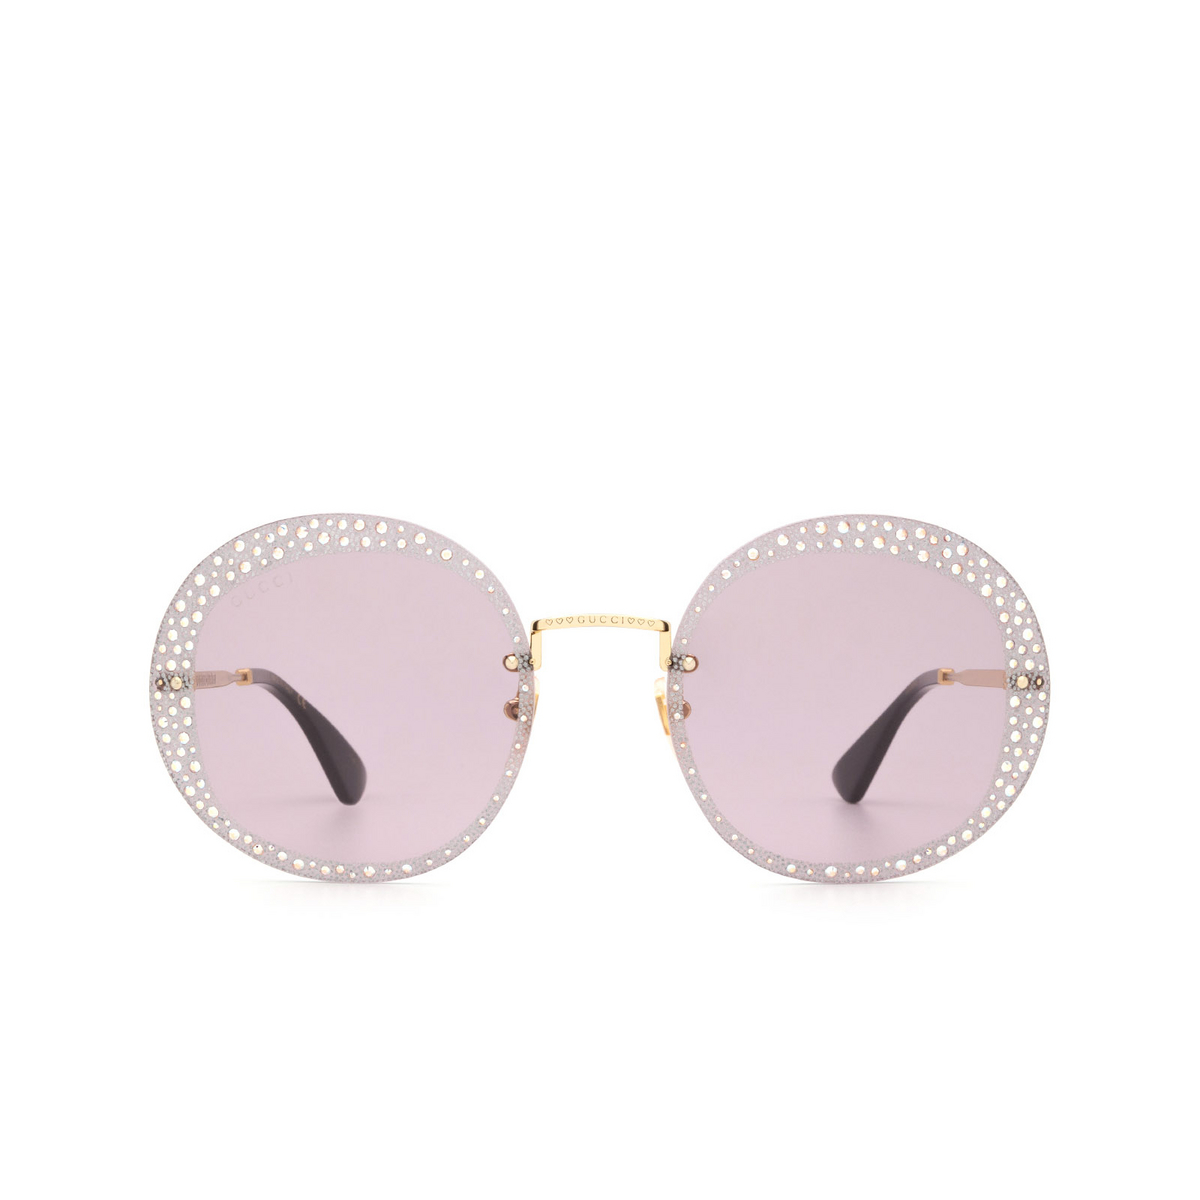 Gucci® Sunglasses: GG0899S color Gold 001 - front view.